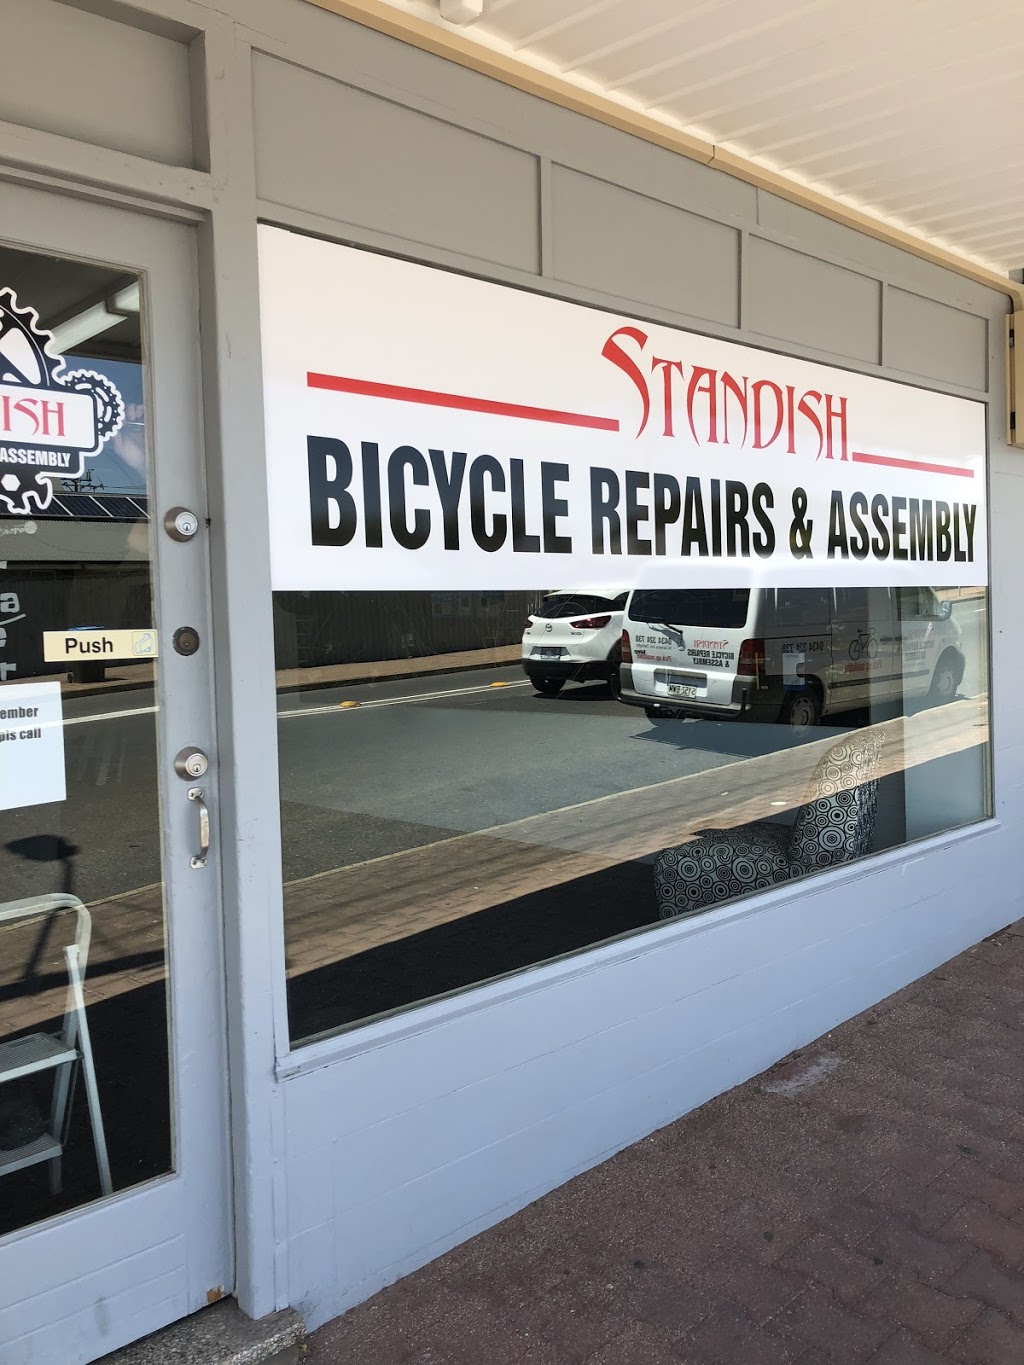 Standish bicycle repair and assembly | bicycle store | 577 Morphett Rd, Seacombe Gardens SA 5047, Australia